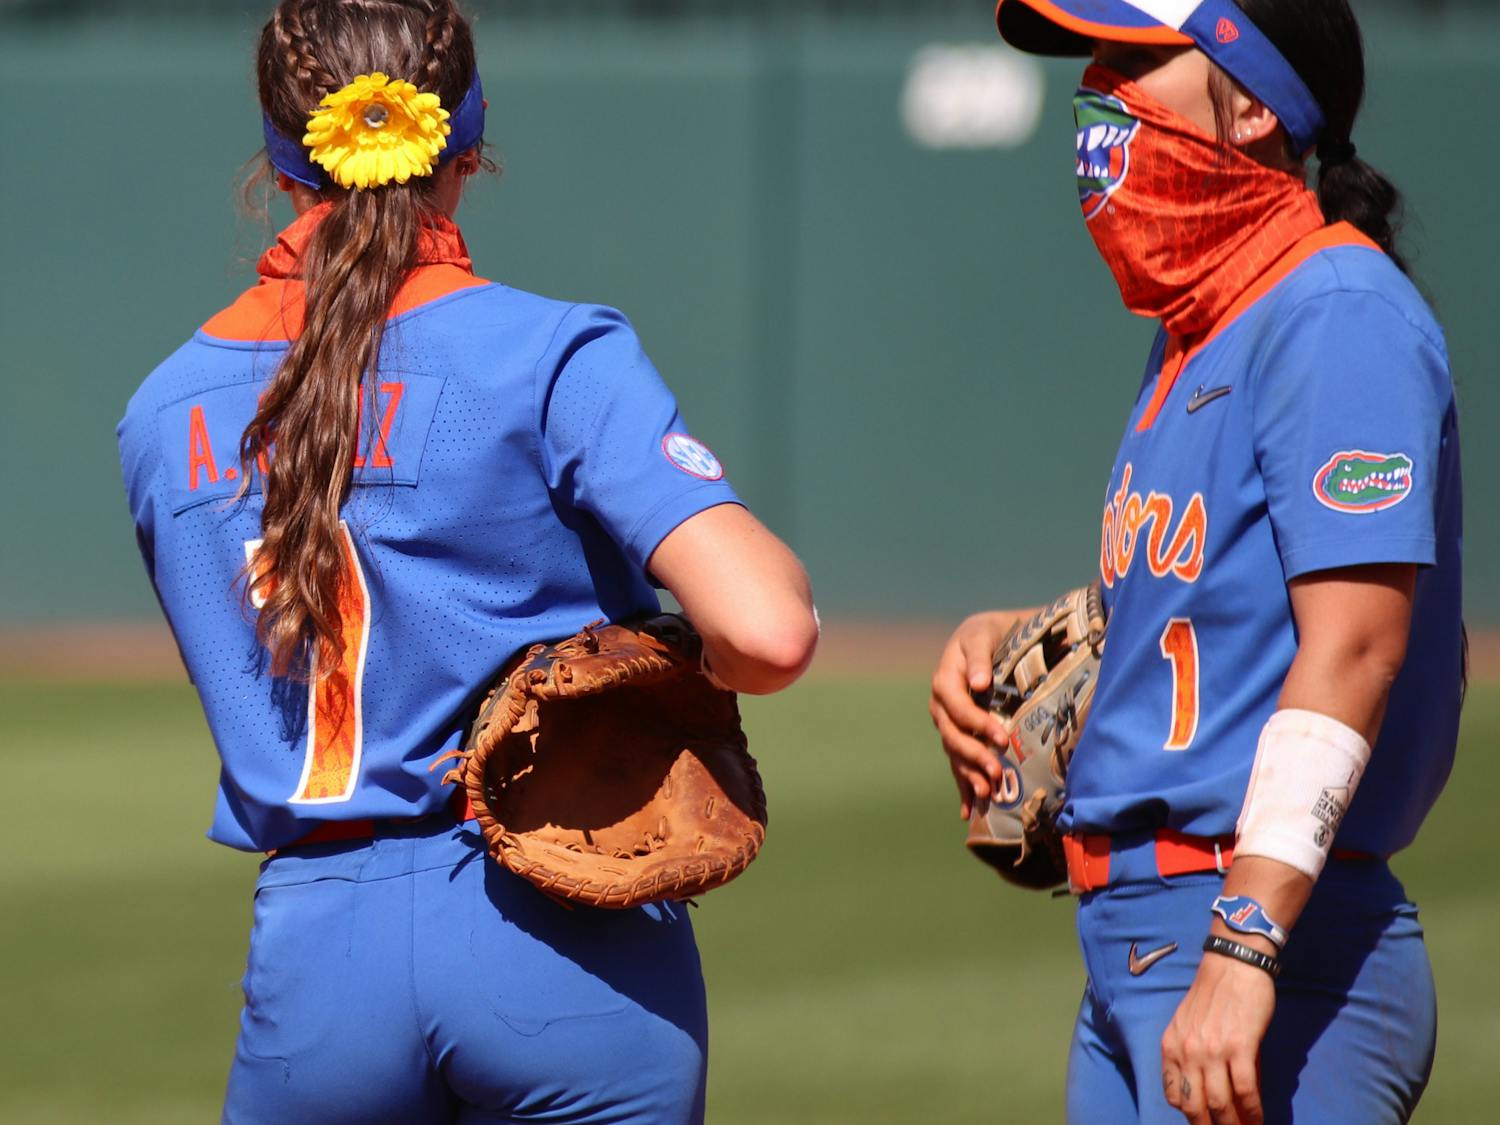 Infielders Hannah Adams and Avery Golez discuss strategy during an on-field timeout against Louisville, 2021